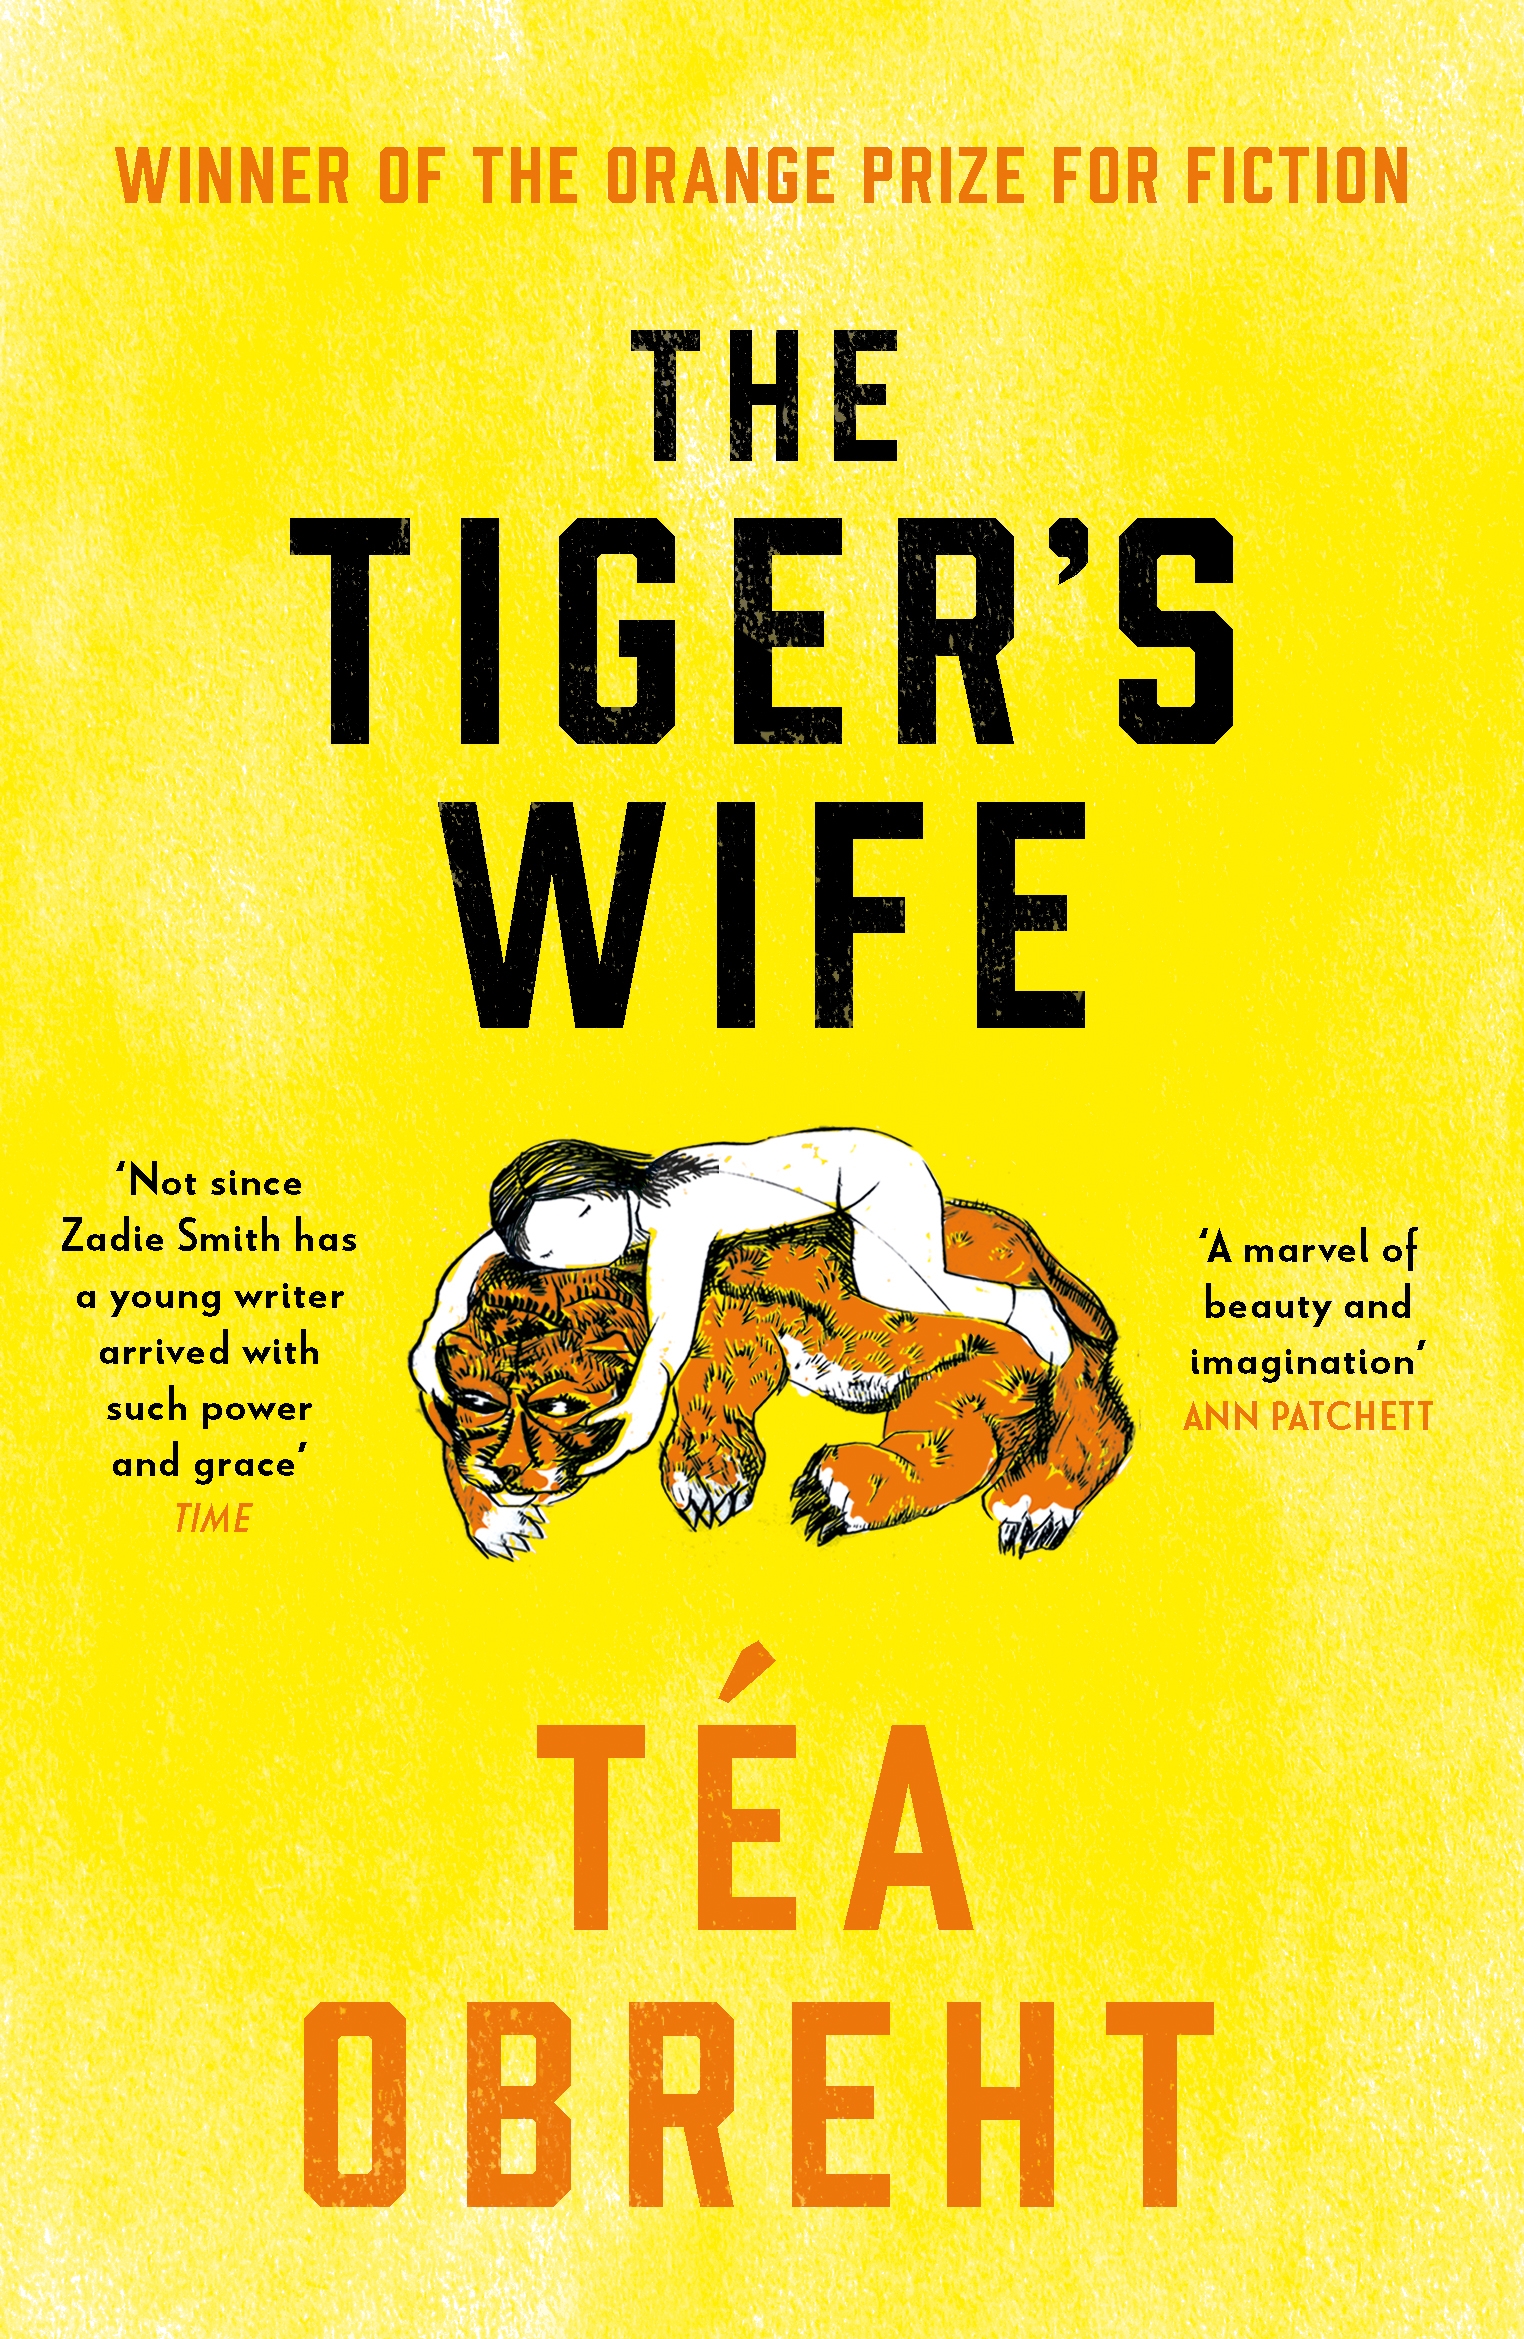 The Tiger's Wife cover.